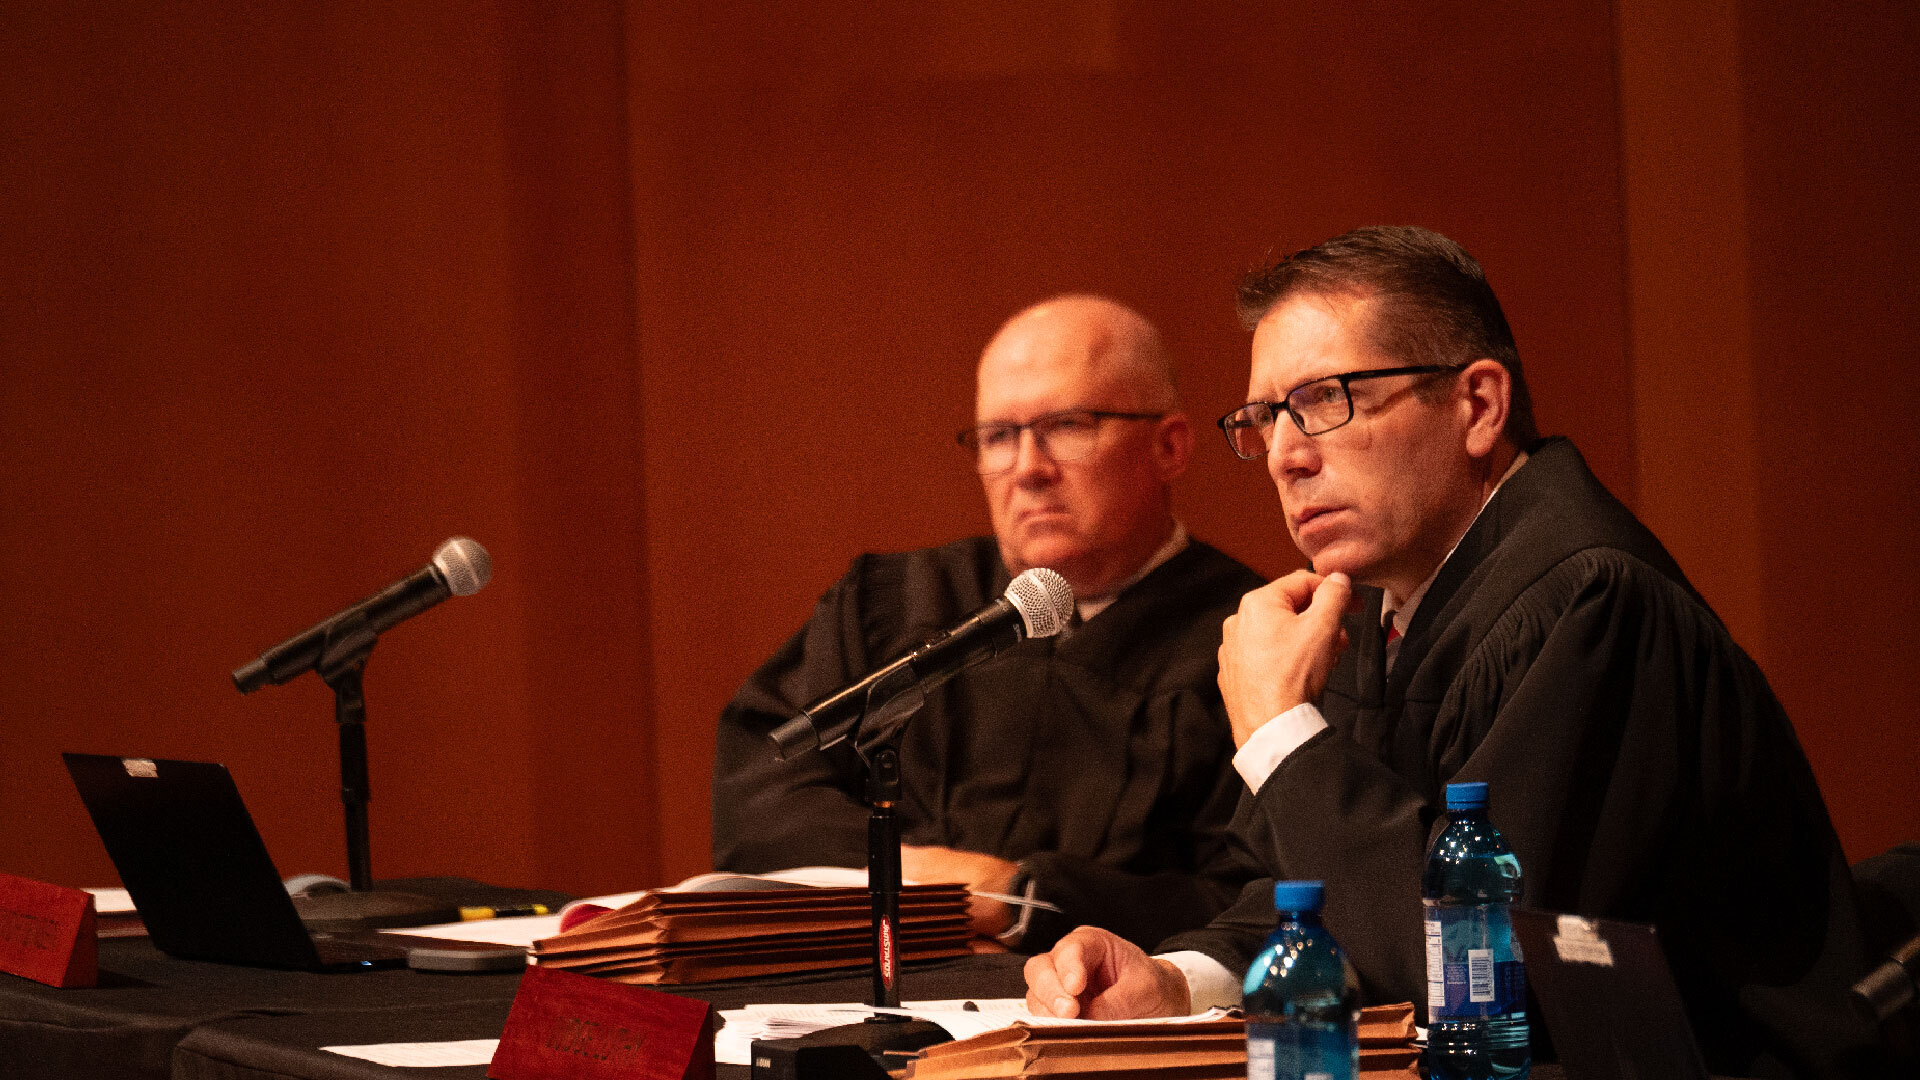 Utah Court of Appeals Judges Mortensen and Luthy hear property cases at USU